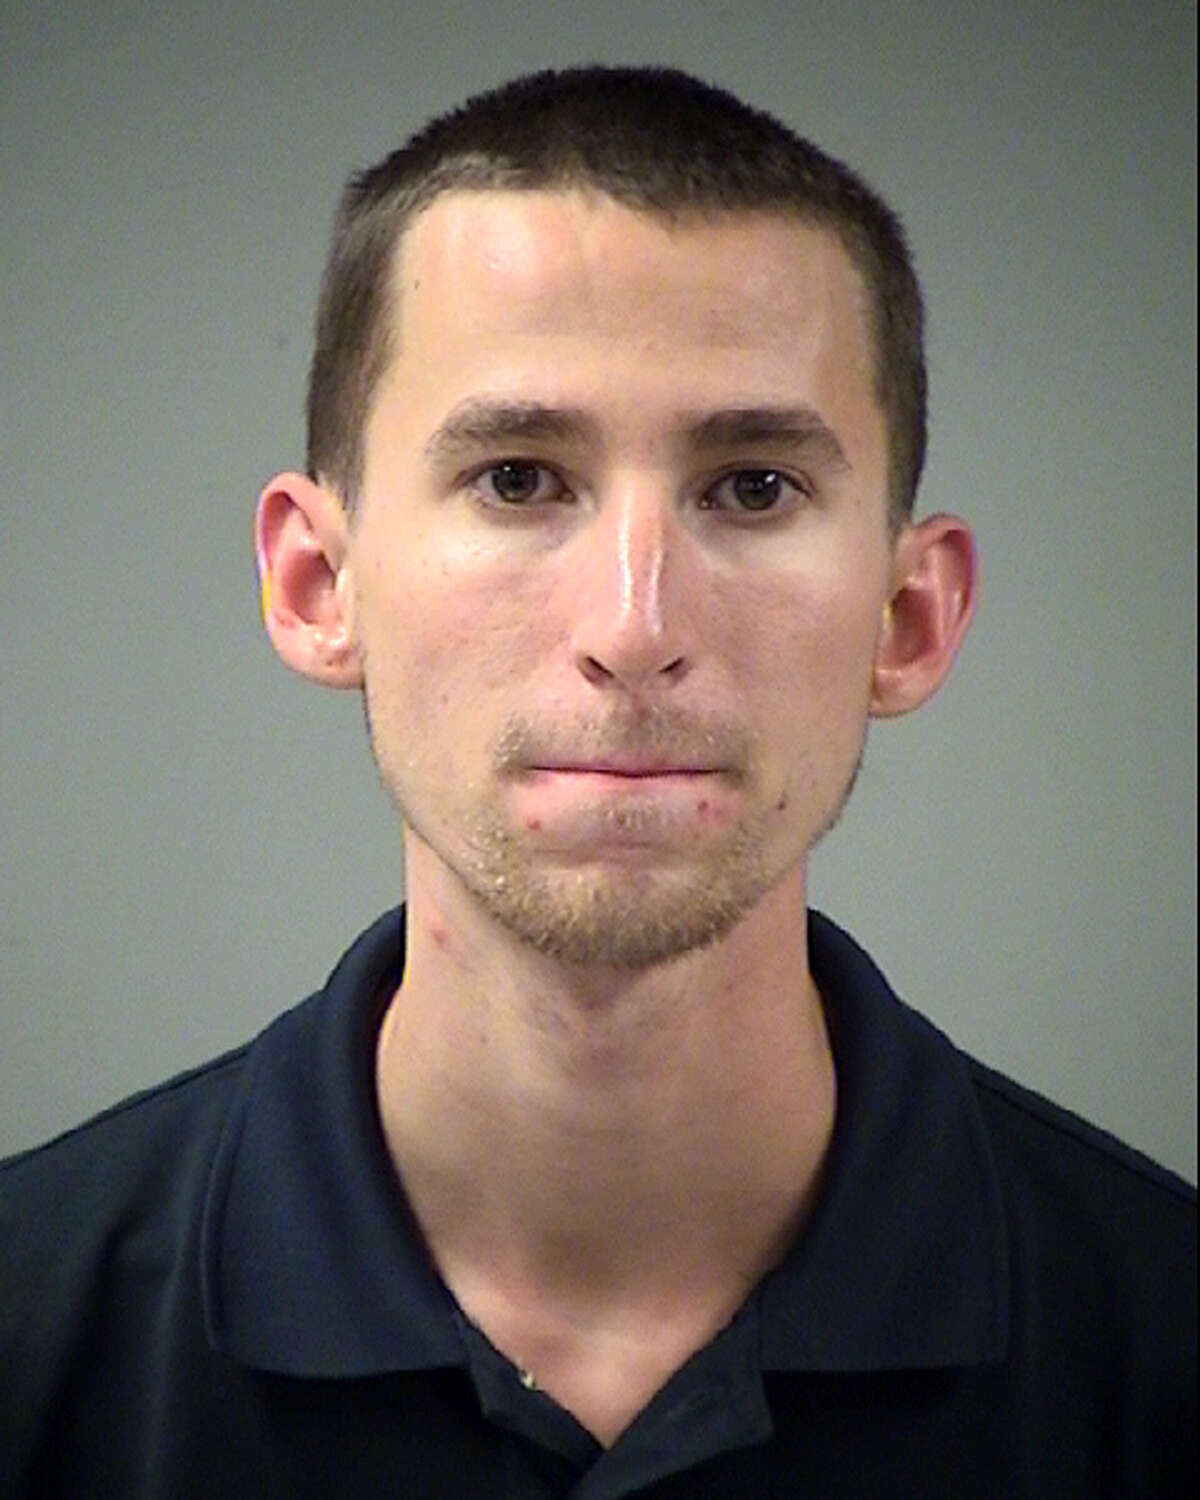 Christopher Branum, 22, is accused of aggravated sexual assault of a child.